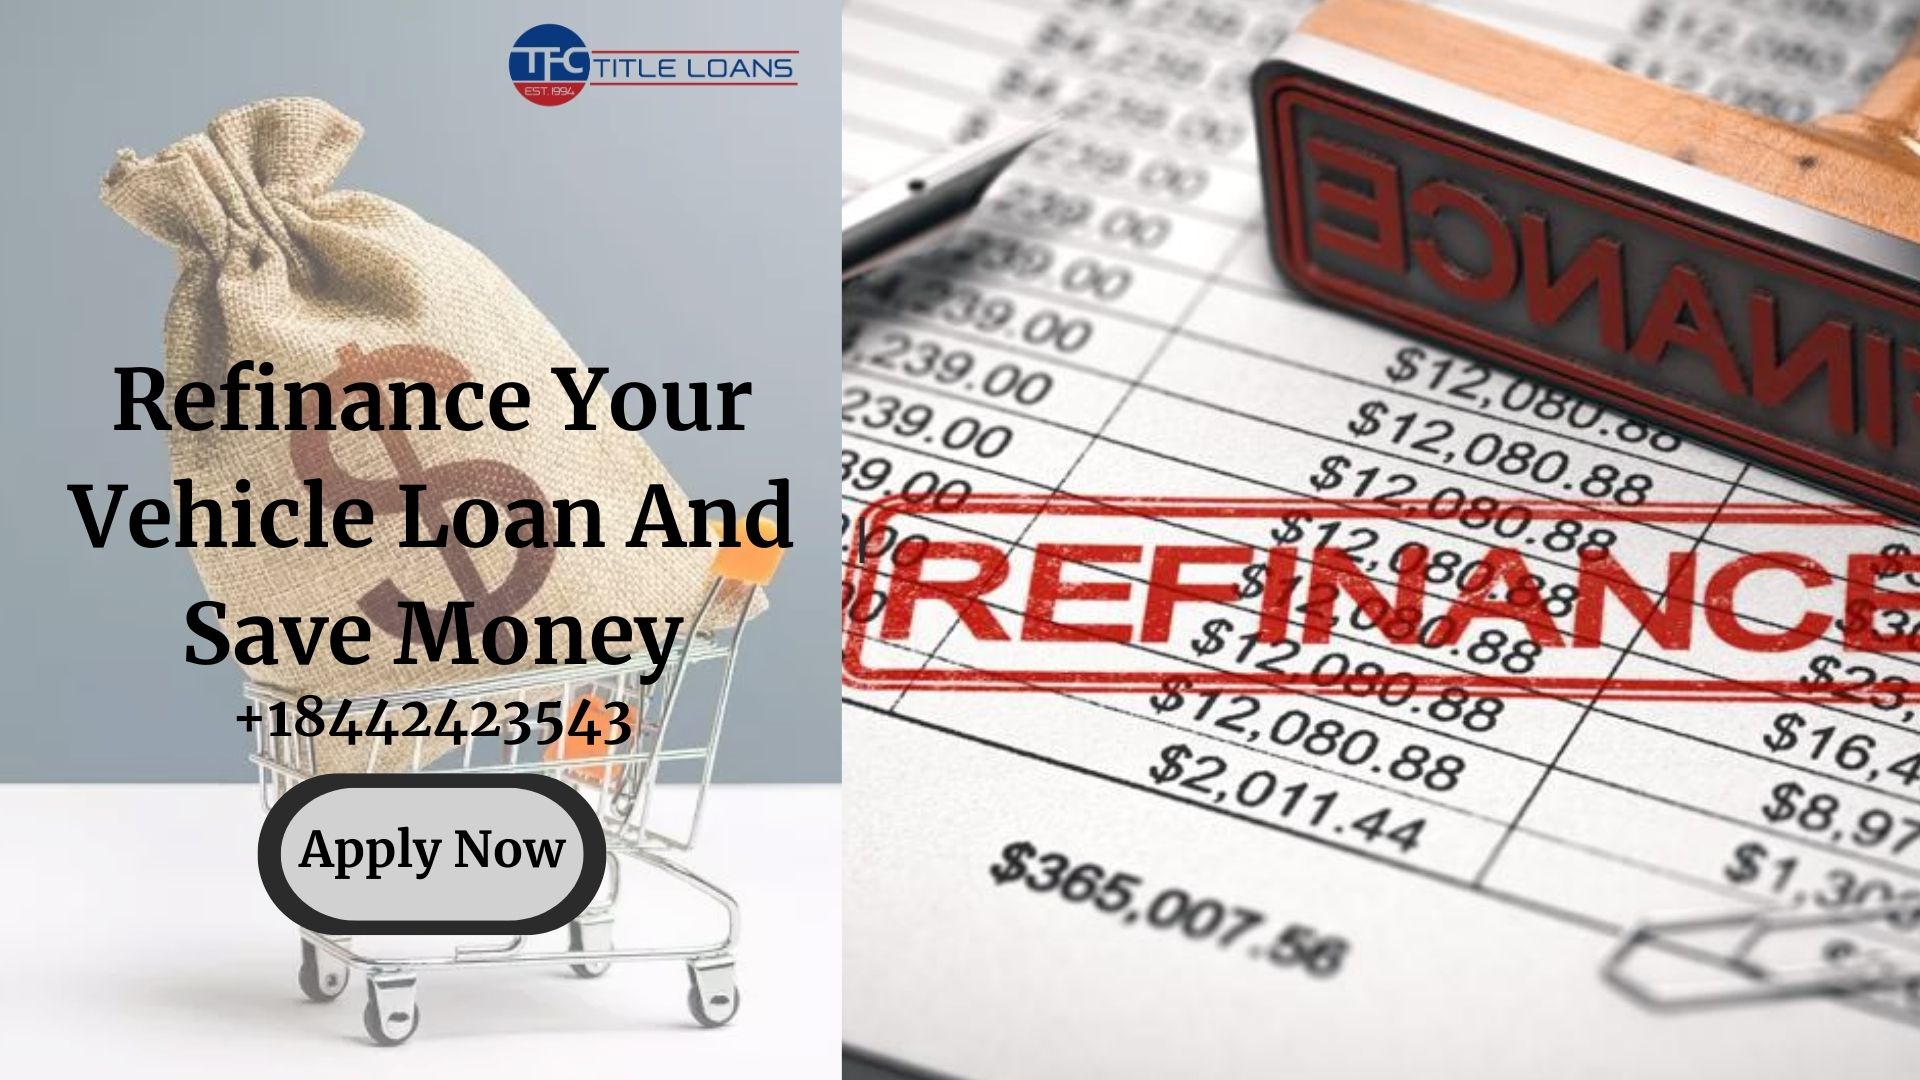 Refinance Your Vehicle Loan And Save On Your Monthly Payments